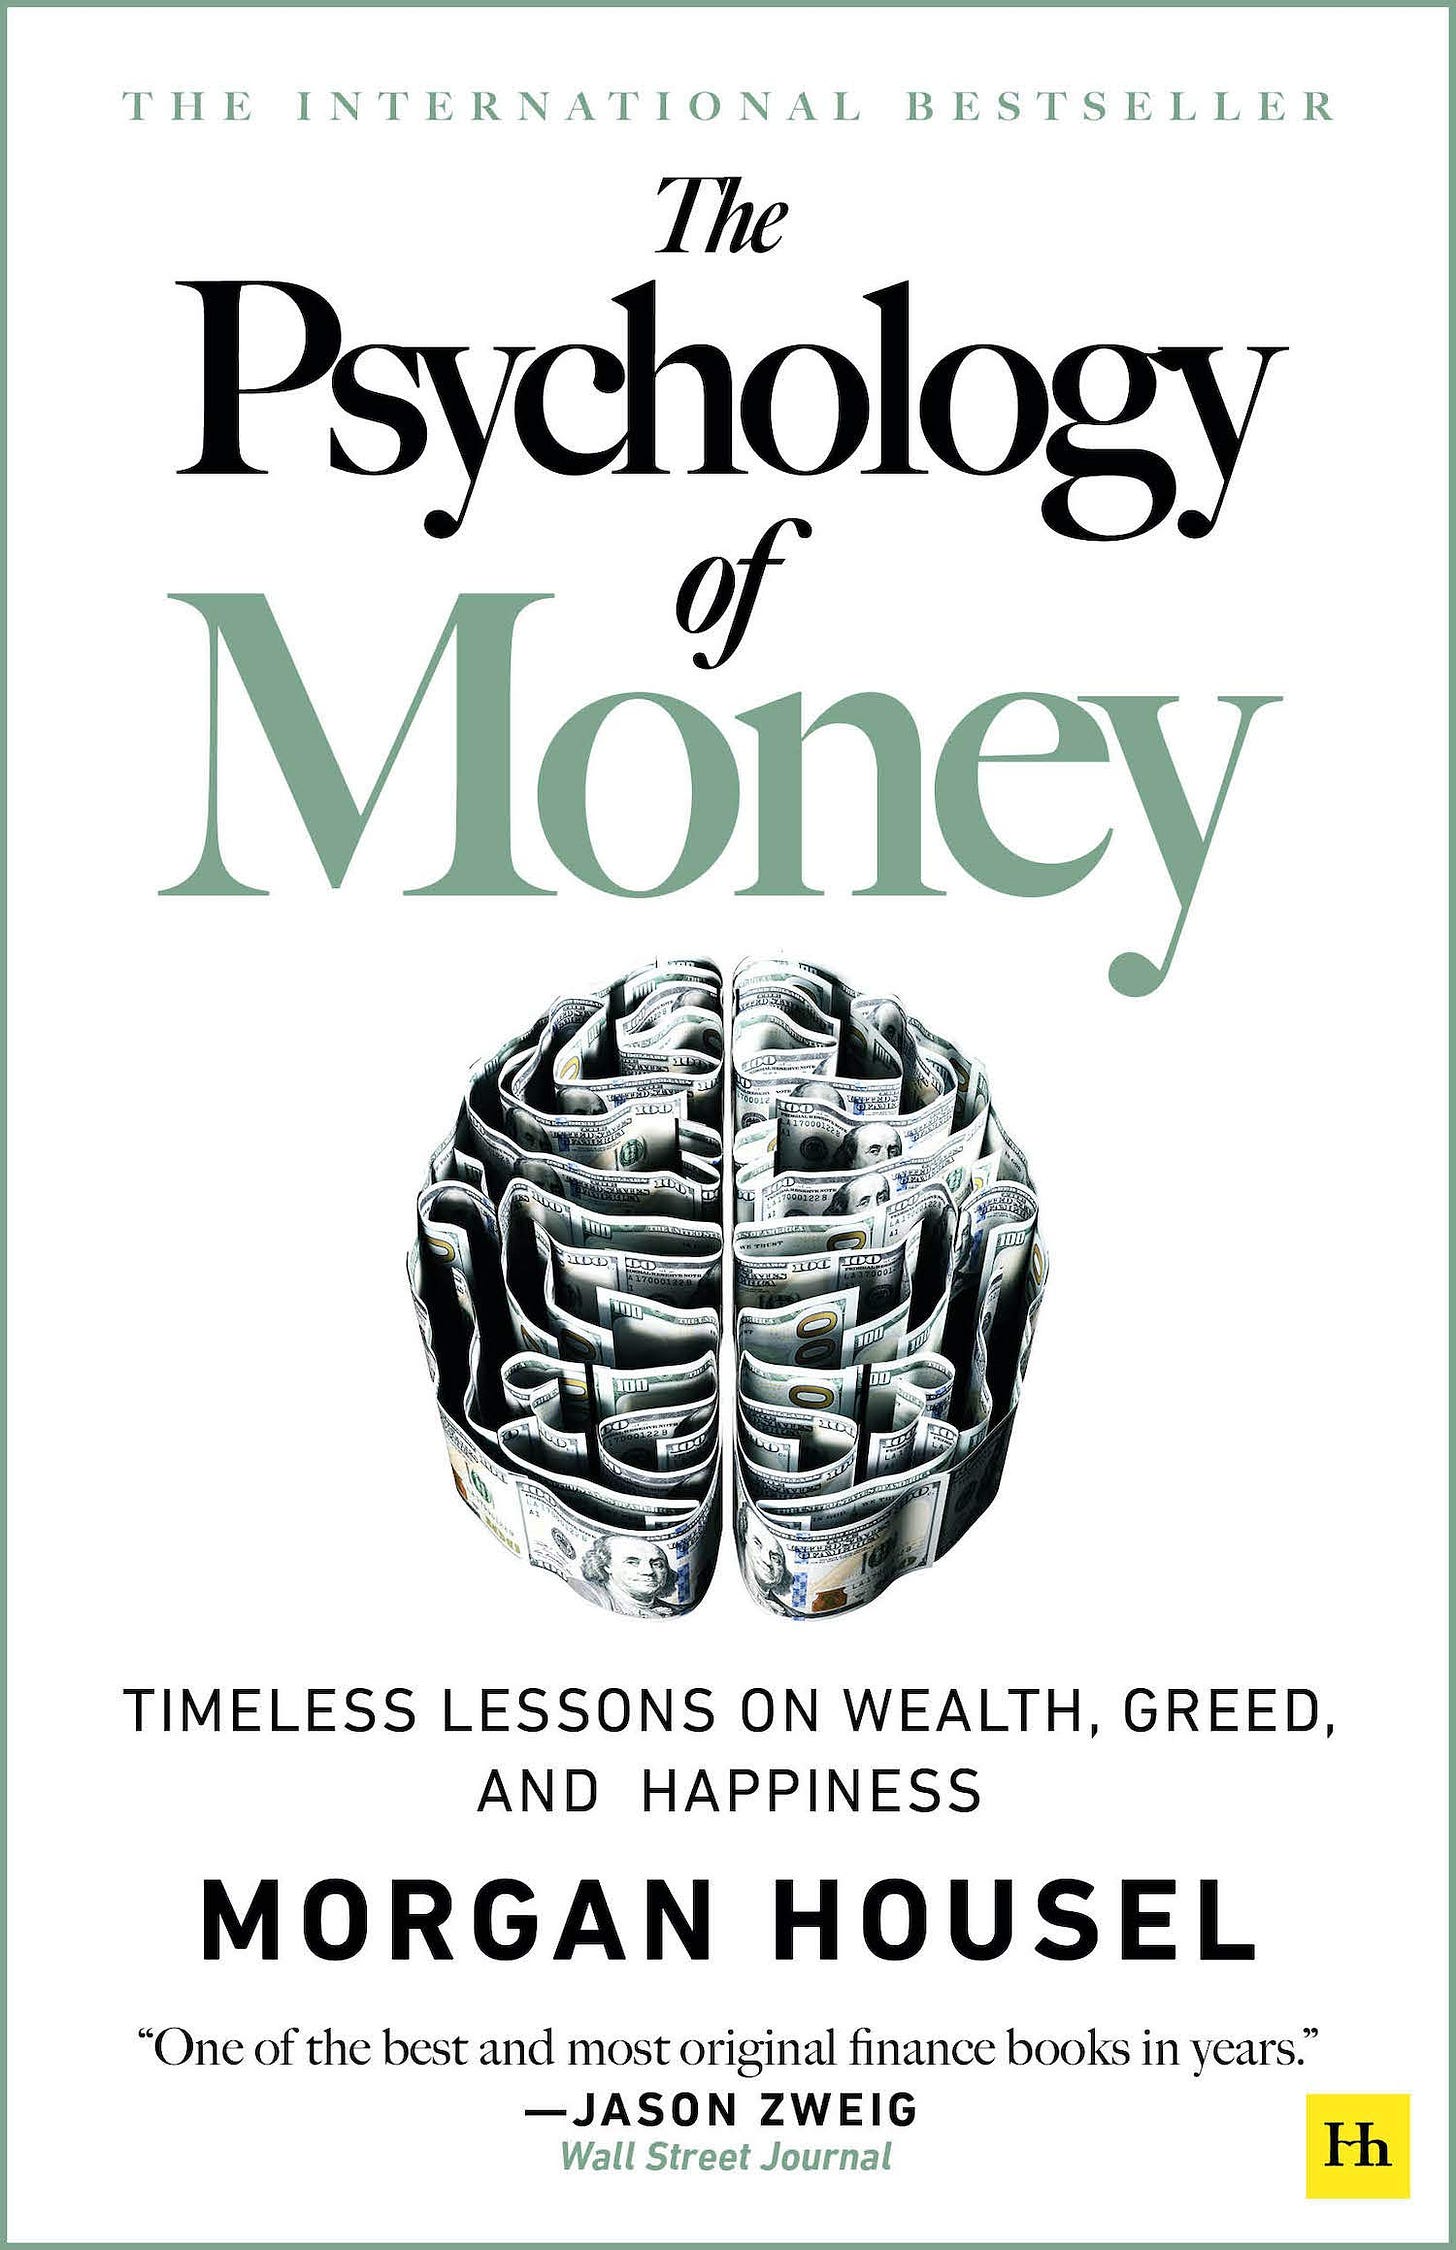 The Psychology of Money: Timeless lessons on wealth, greed, and happiness:  Housel, Morgan: 9780857197689: Amazon.com: Books